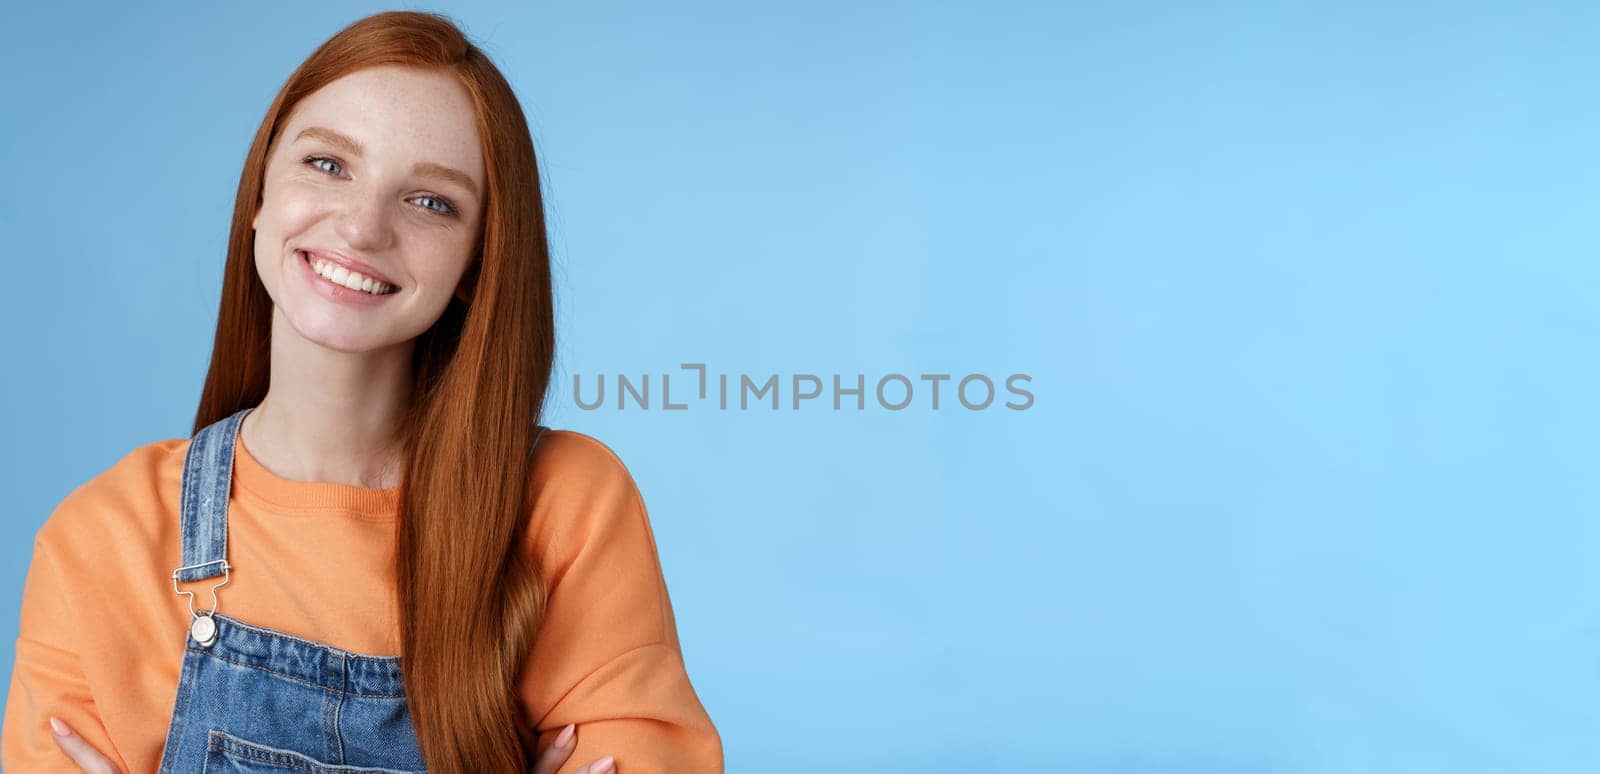 Charismatic kind pleasant redhead girl blue eyes smiling friendly listen politely customer standing blue background tilting head amused grinning cross hands chest professional confidence pose.